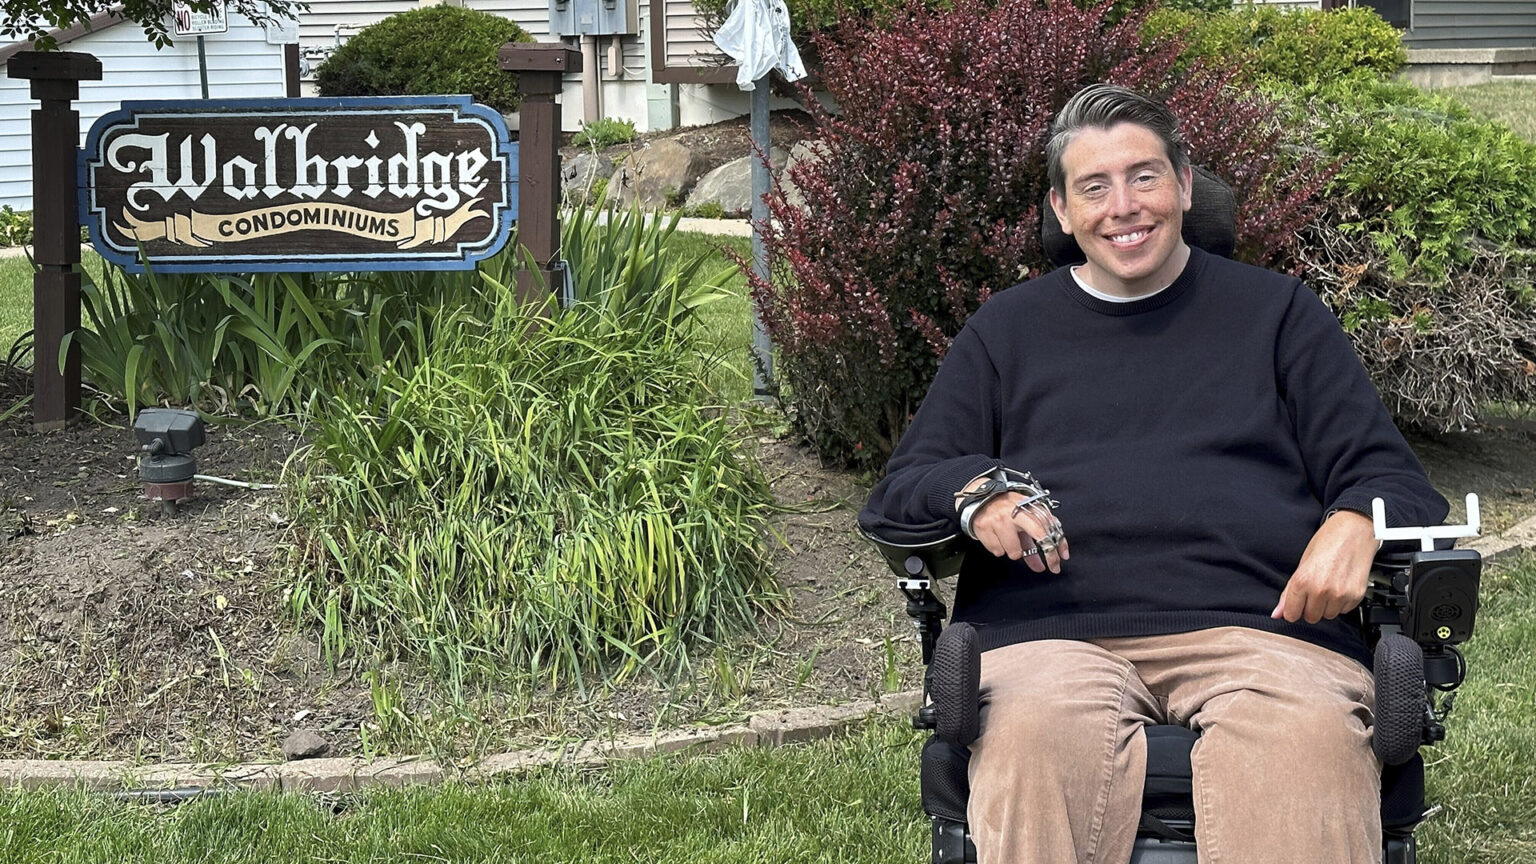 Jimmy Anderson poses for a photo outside in his wheelchair in front of a building with a wood sign reading Walbridge Condominiums placed among shrubs and other landscaping plants.